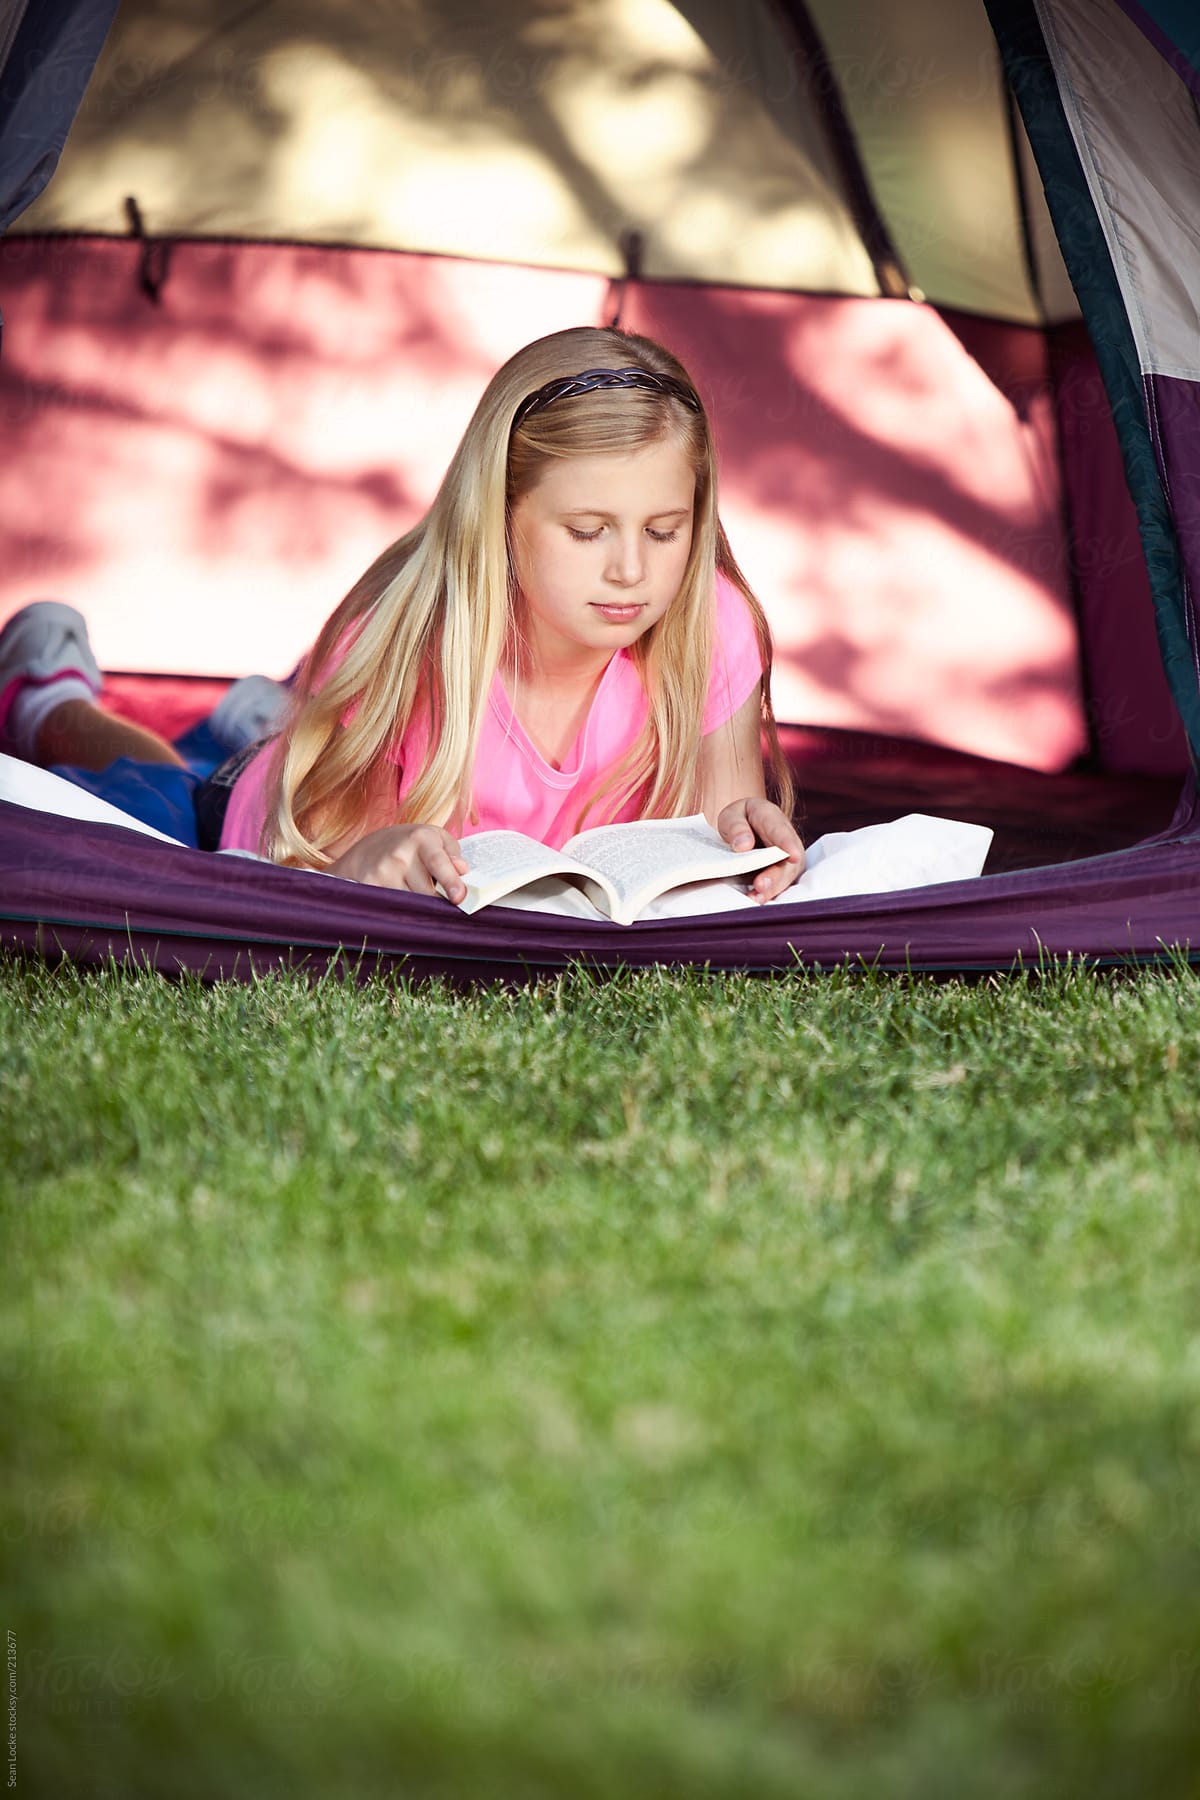 Camping: Girl Takes Break to Read